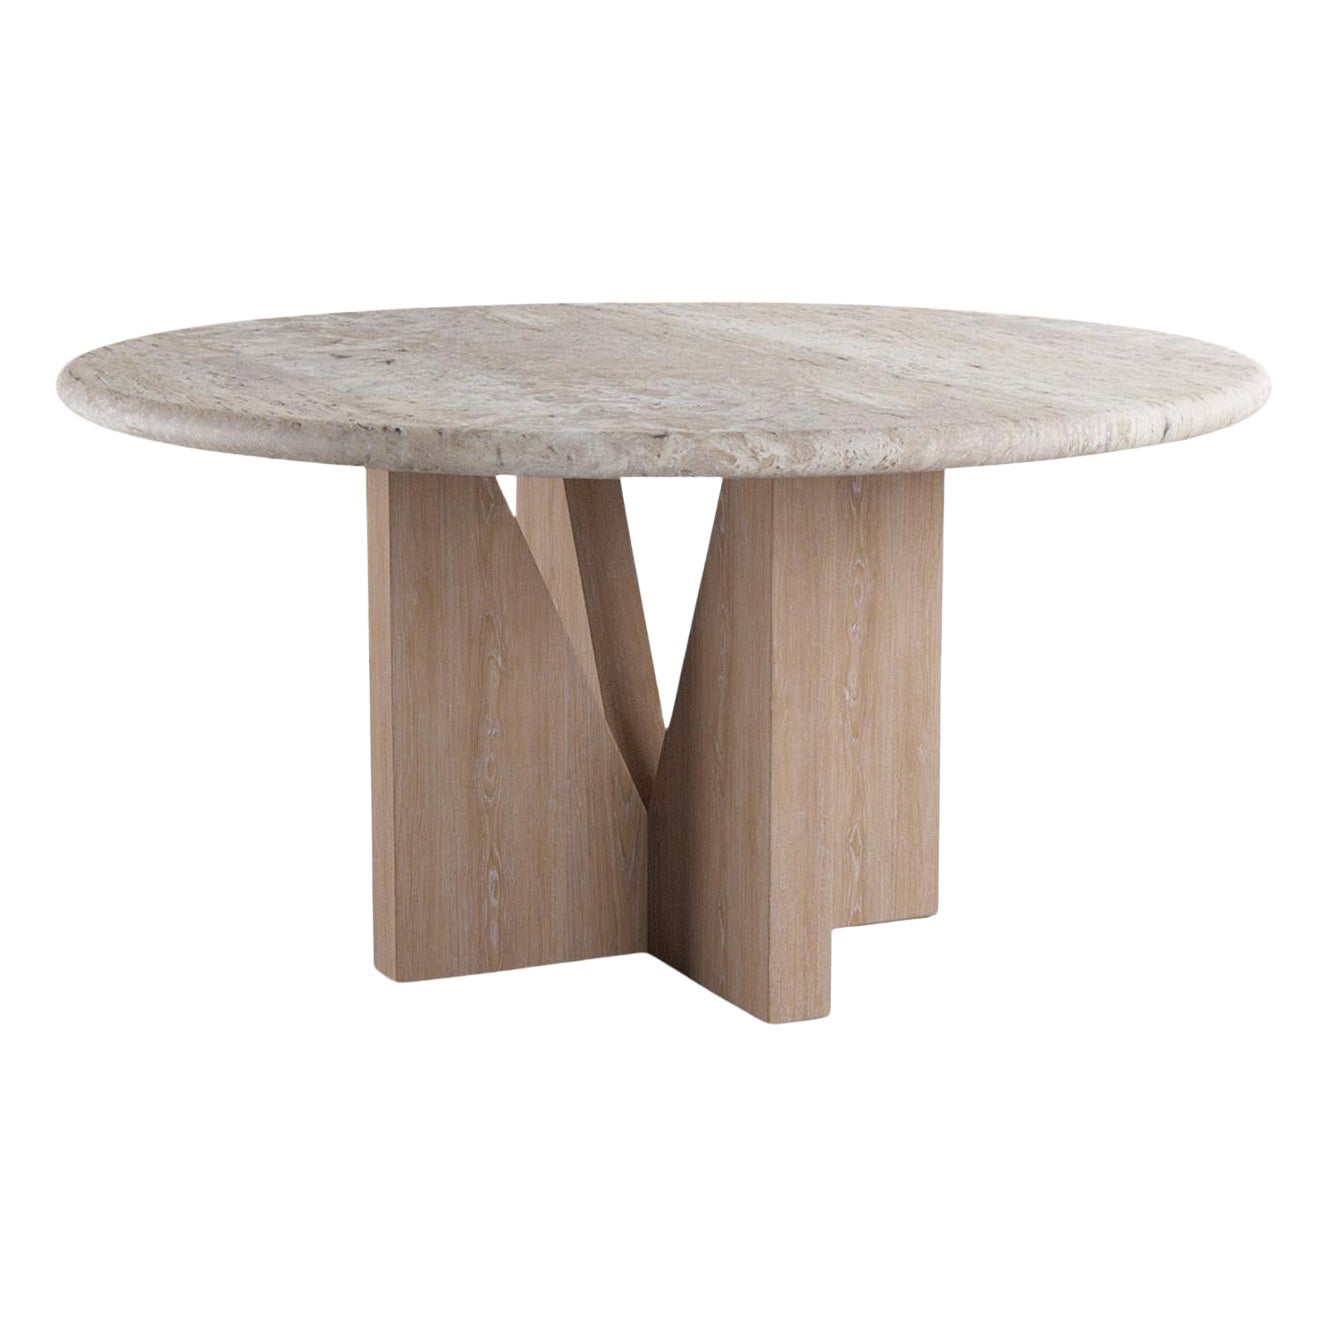 "Elysées" Travertine and Cerused French Oak Dining Table by Christiane Lemieux